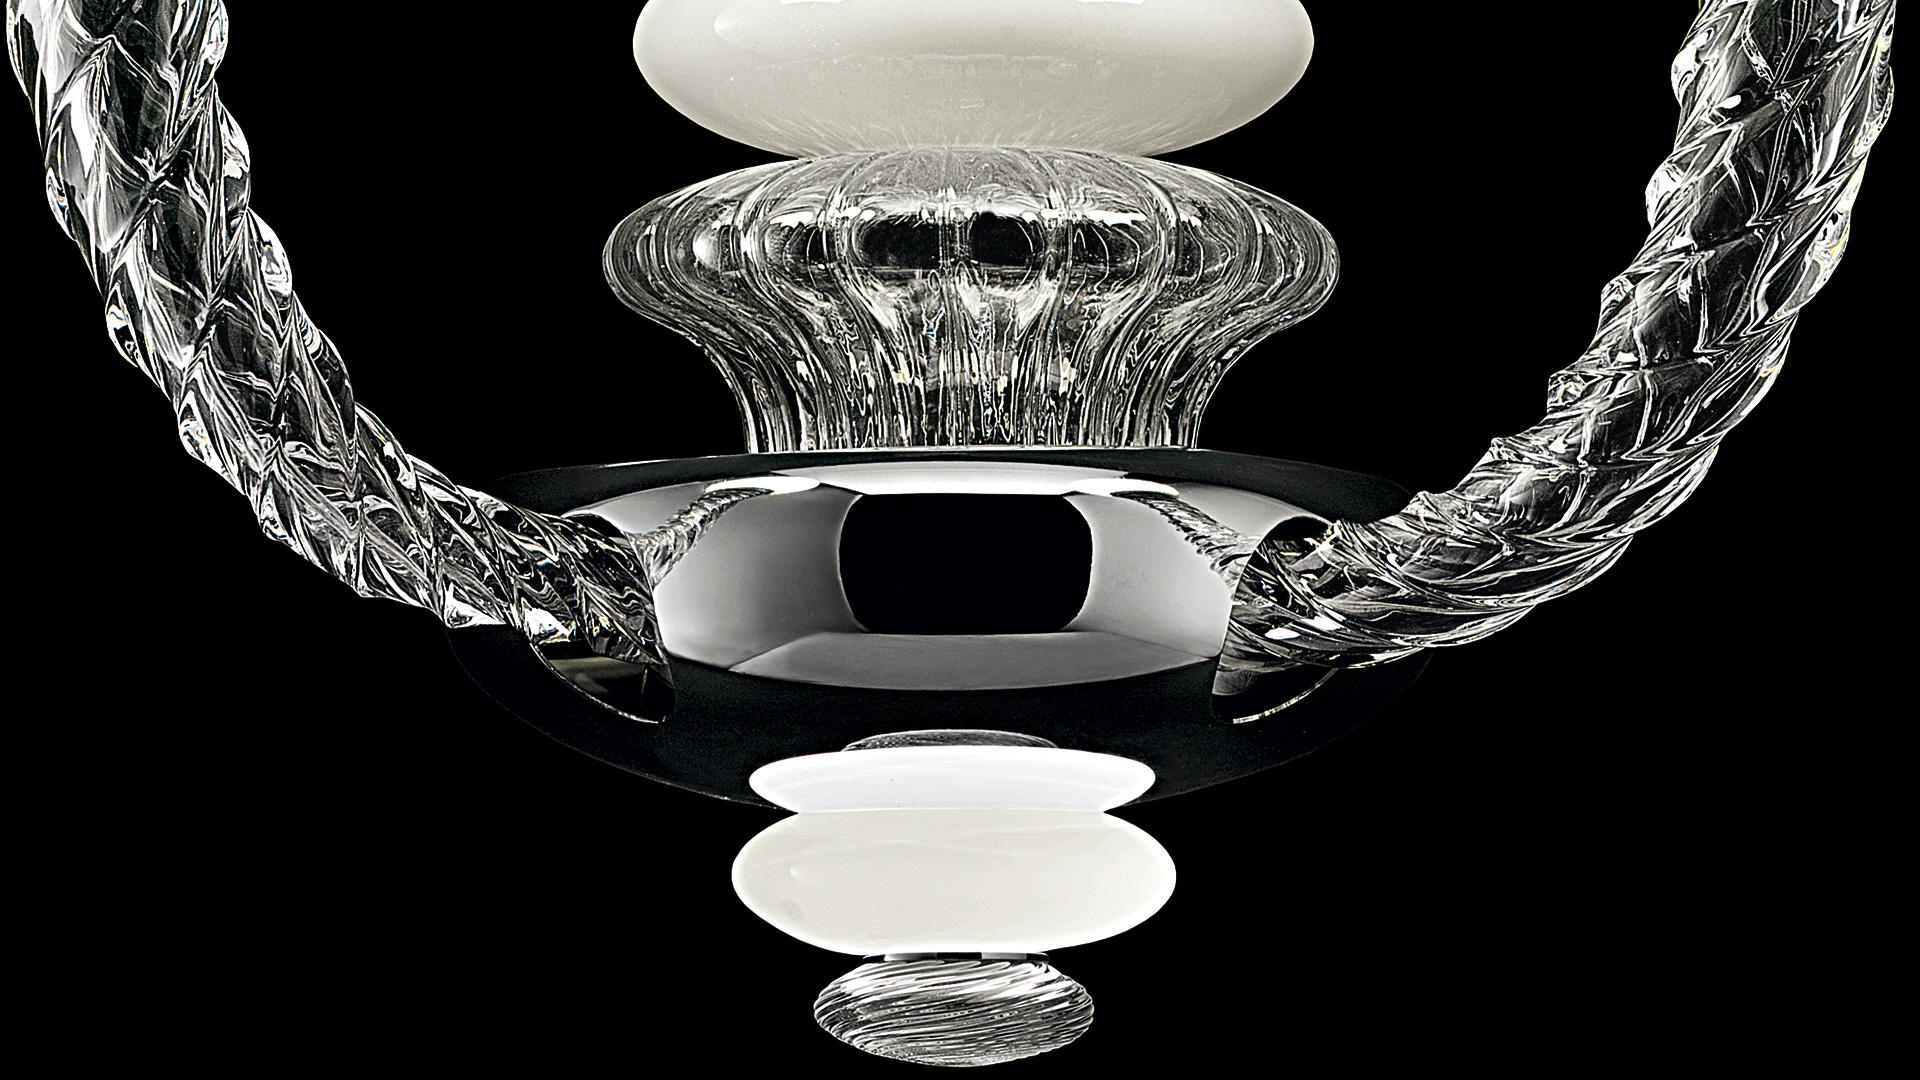 Italian Pigalle 5680 02 Wall Sconce in White/Crystal Glass, by Barovier&Toso